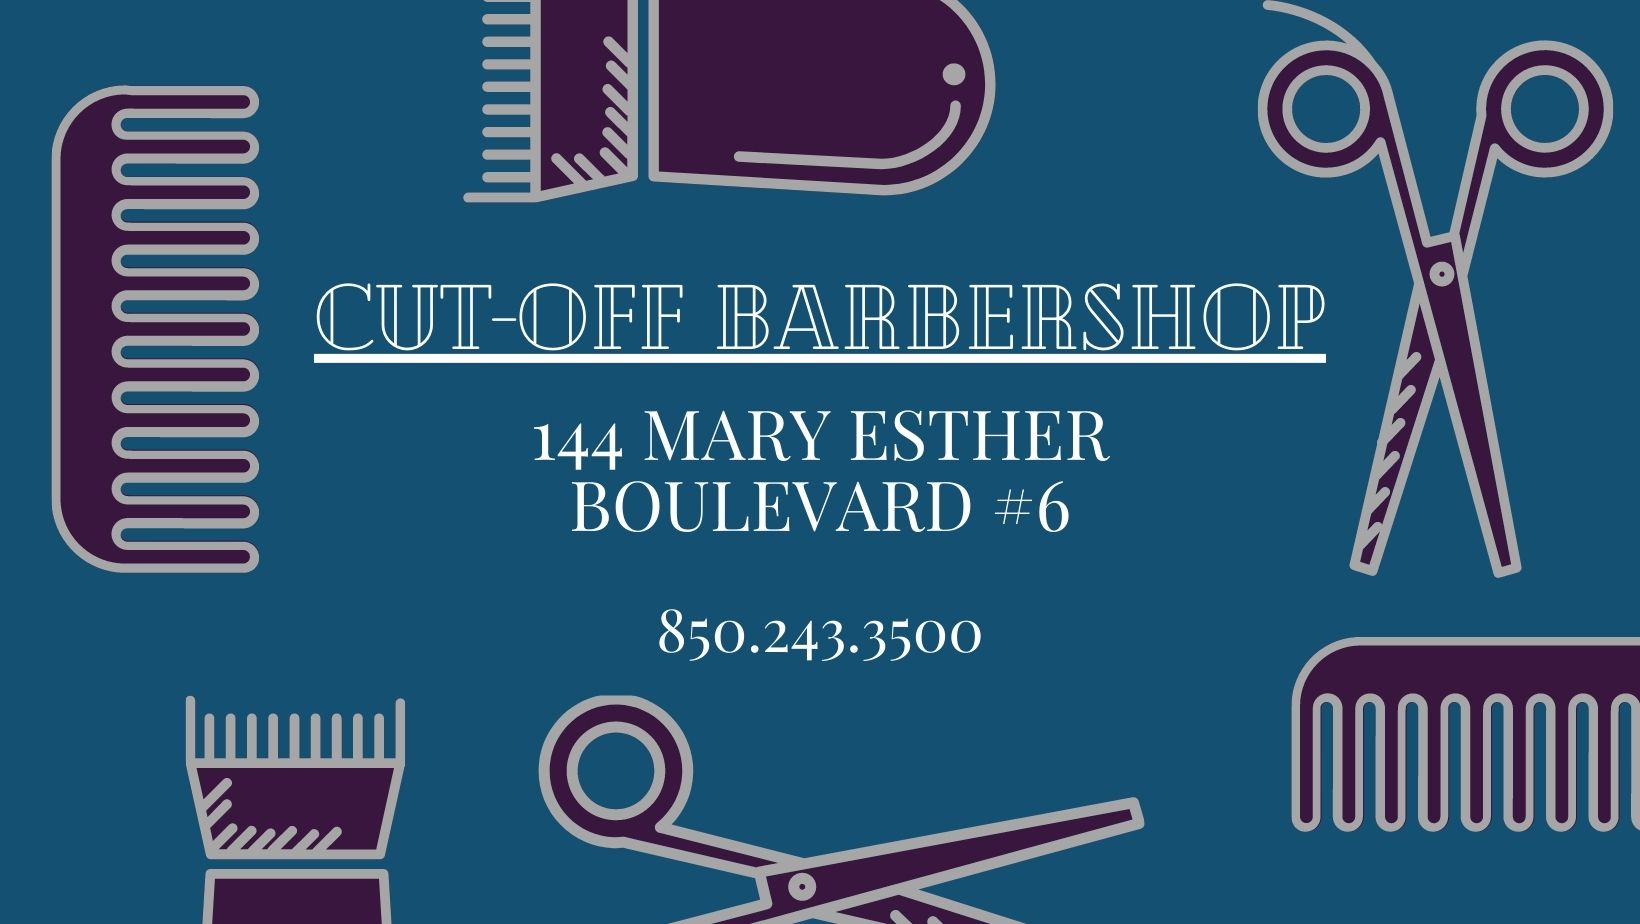 Cut-Off Barber Shop 144 Mary Esther Blvd, Mary Esther Florida 32569